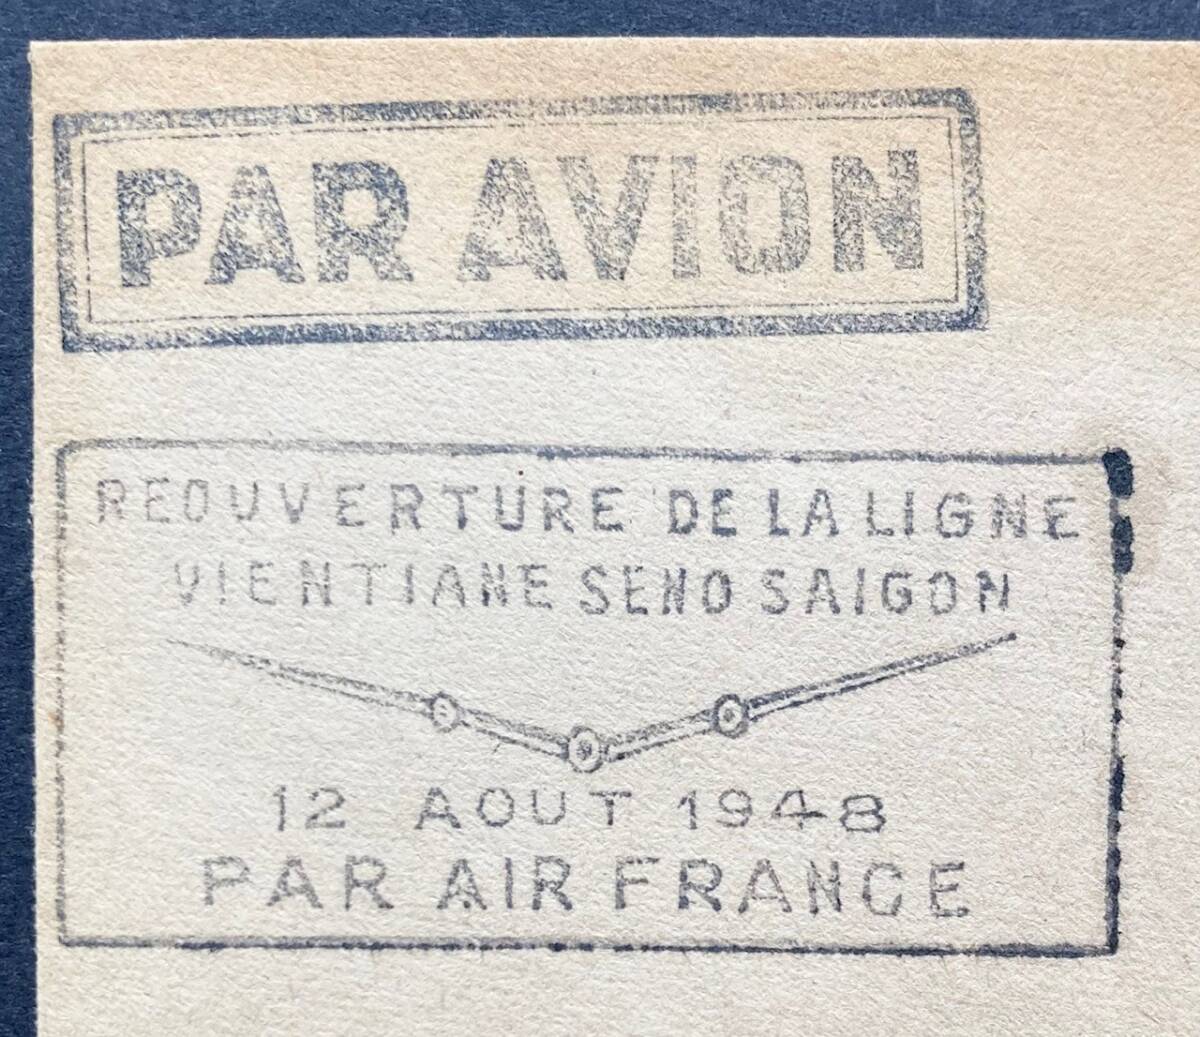 [ France . India sina(la male )]1948 year FFCbien tea n departure rhinoceros gon addressed to Air France aviation . repeated . rubber seal kashe attaching entire superior article 